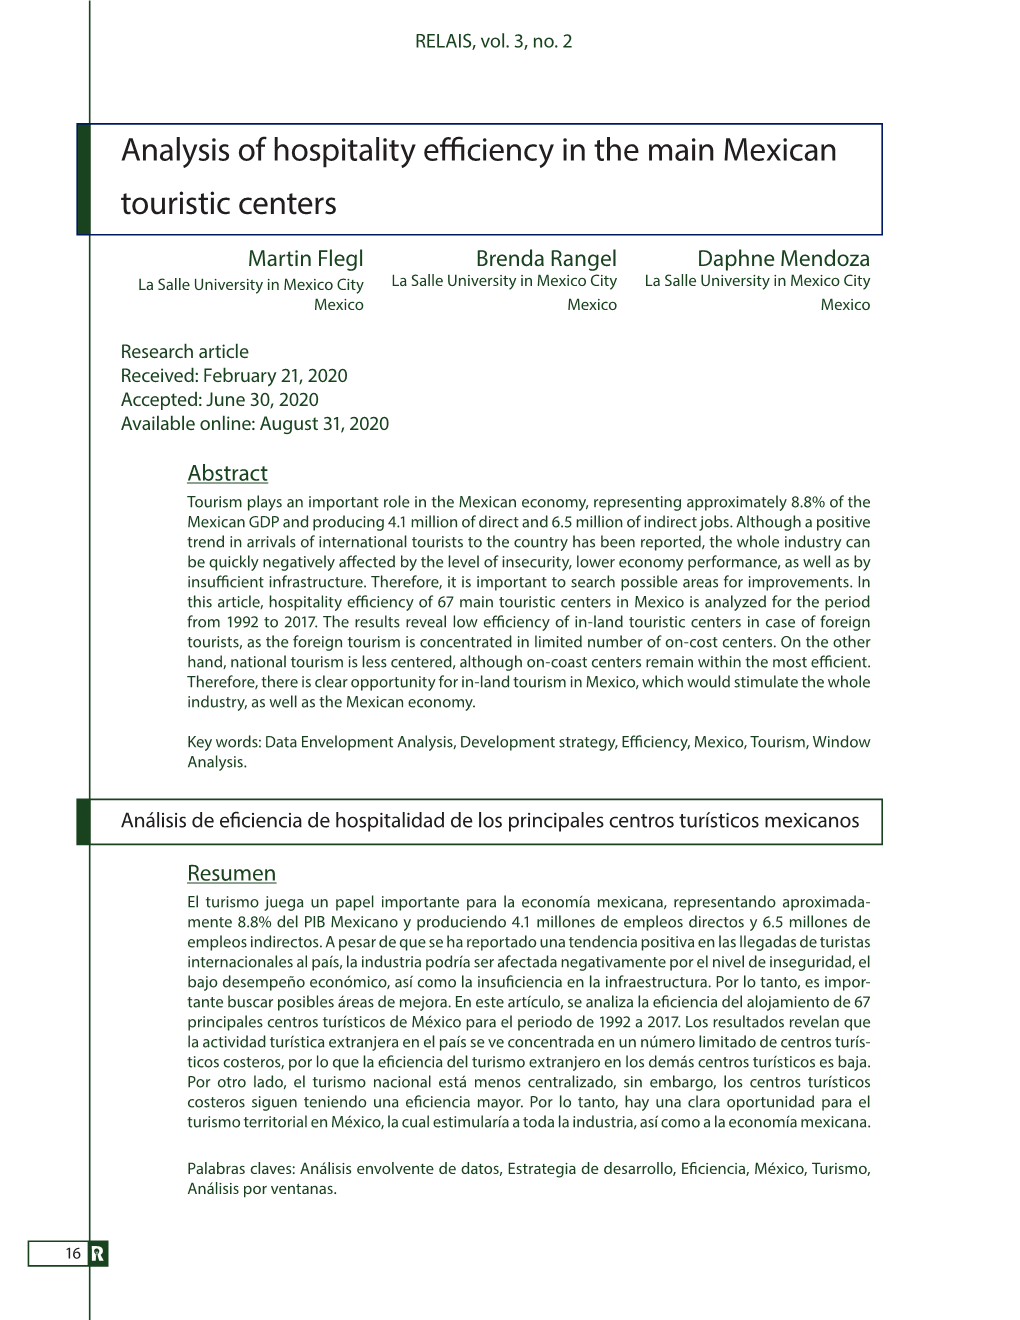 Analysis of Hospitality Efficiency in the Main Mexican Touristic Centers